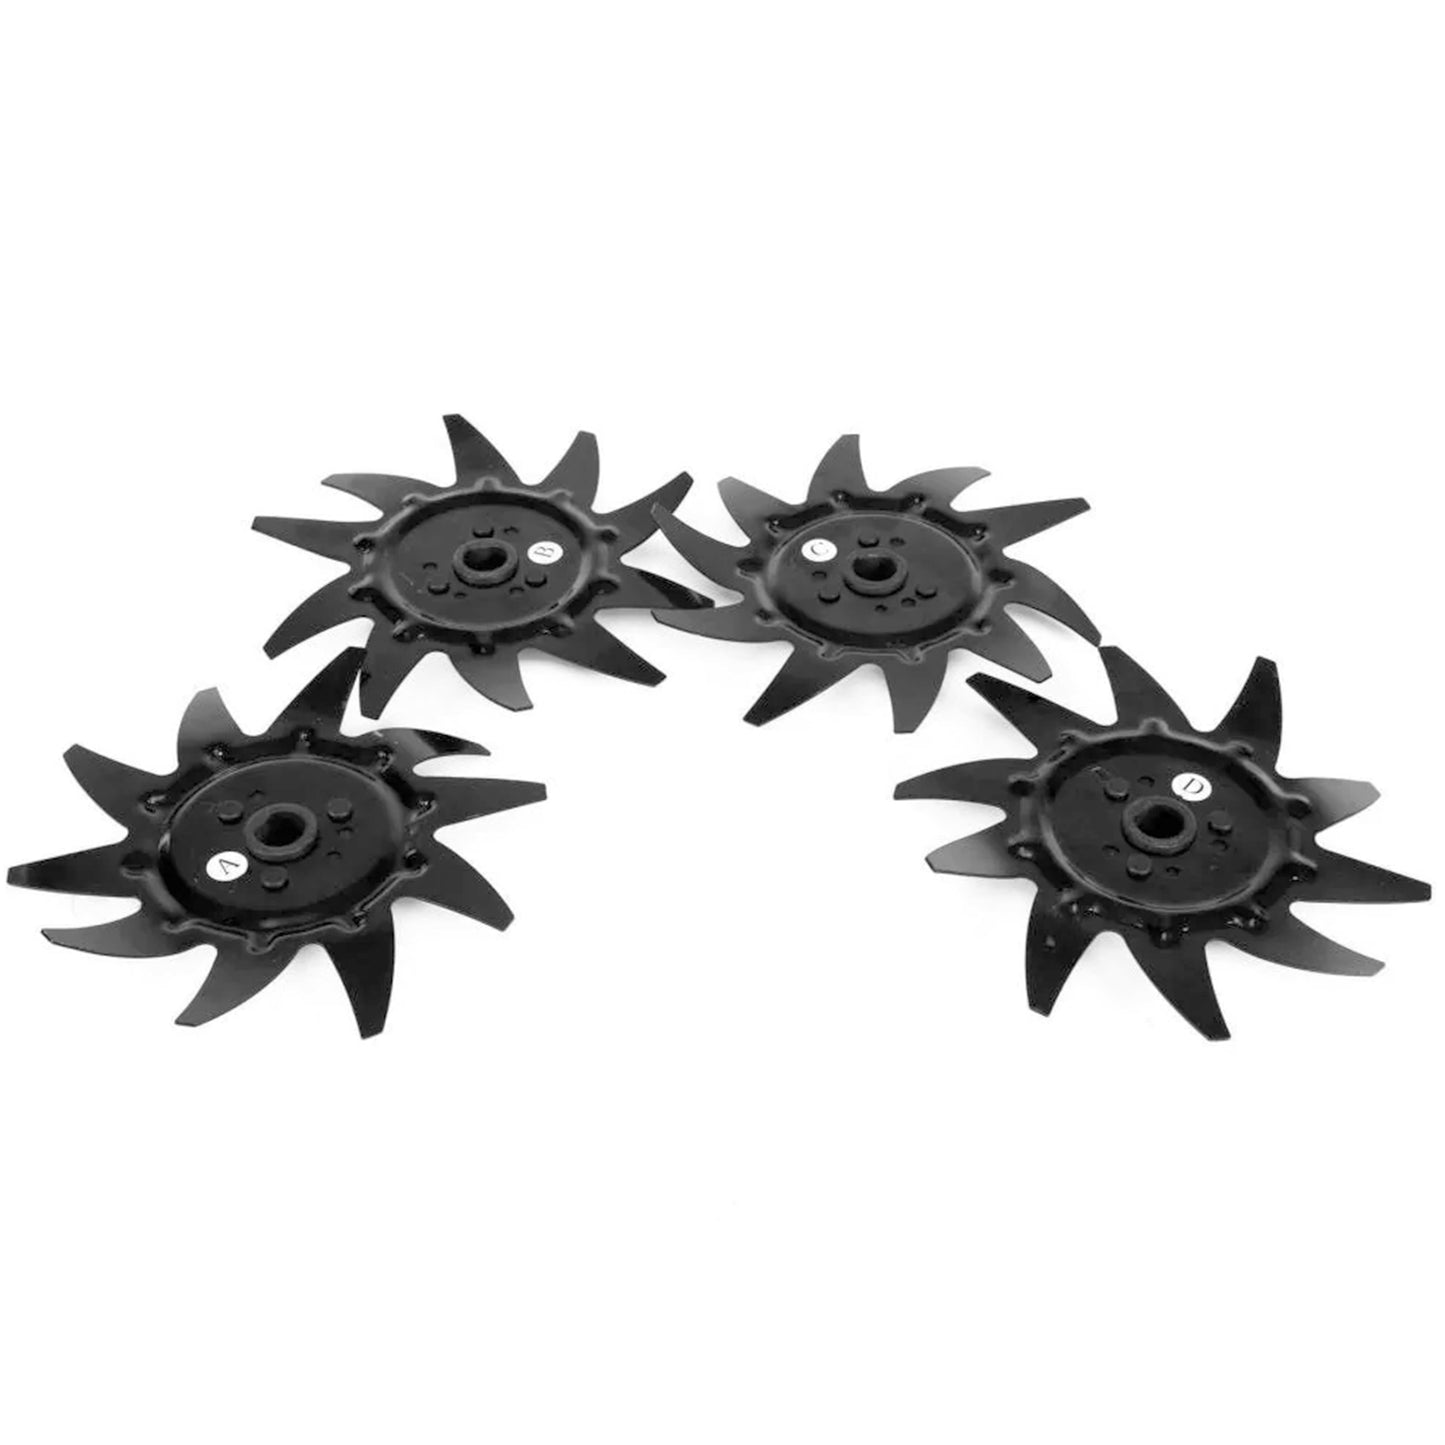 10-Inch Replacement Cultivator / Tiller Tines (4 Pack)